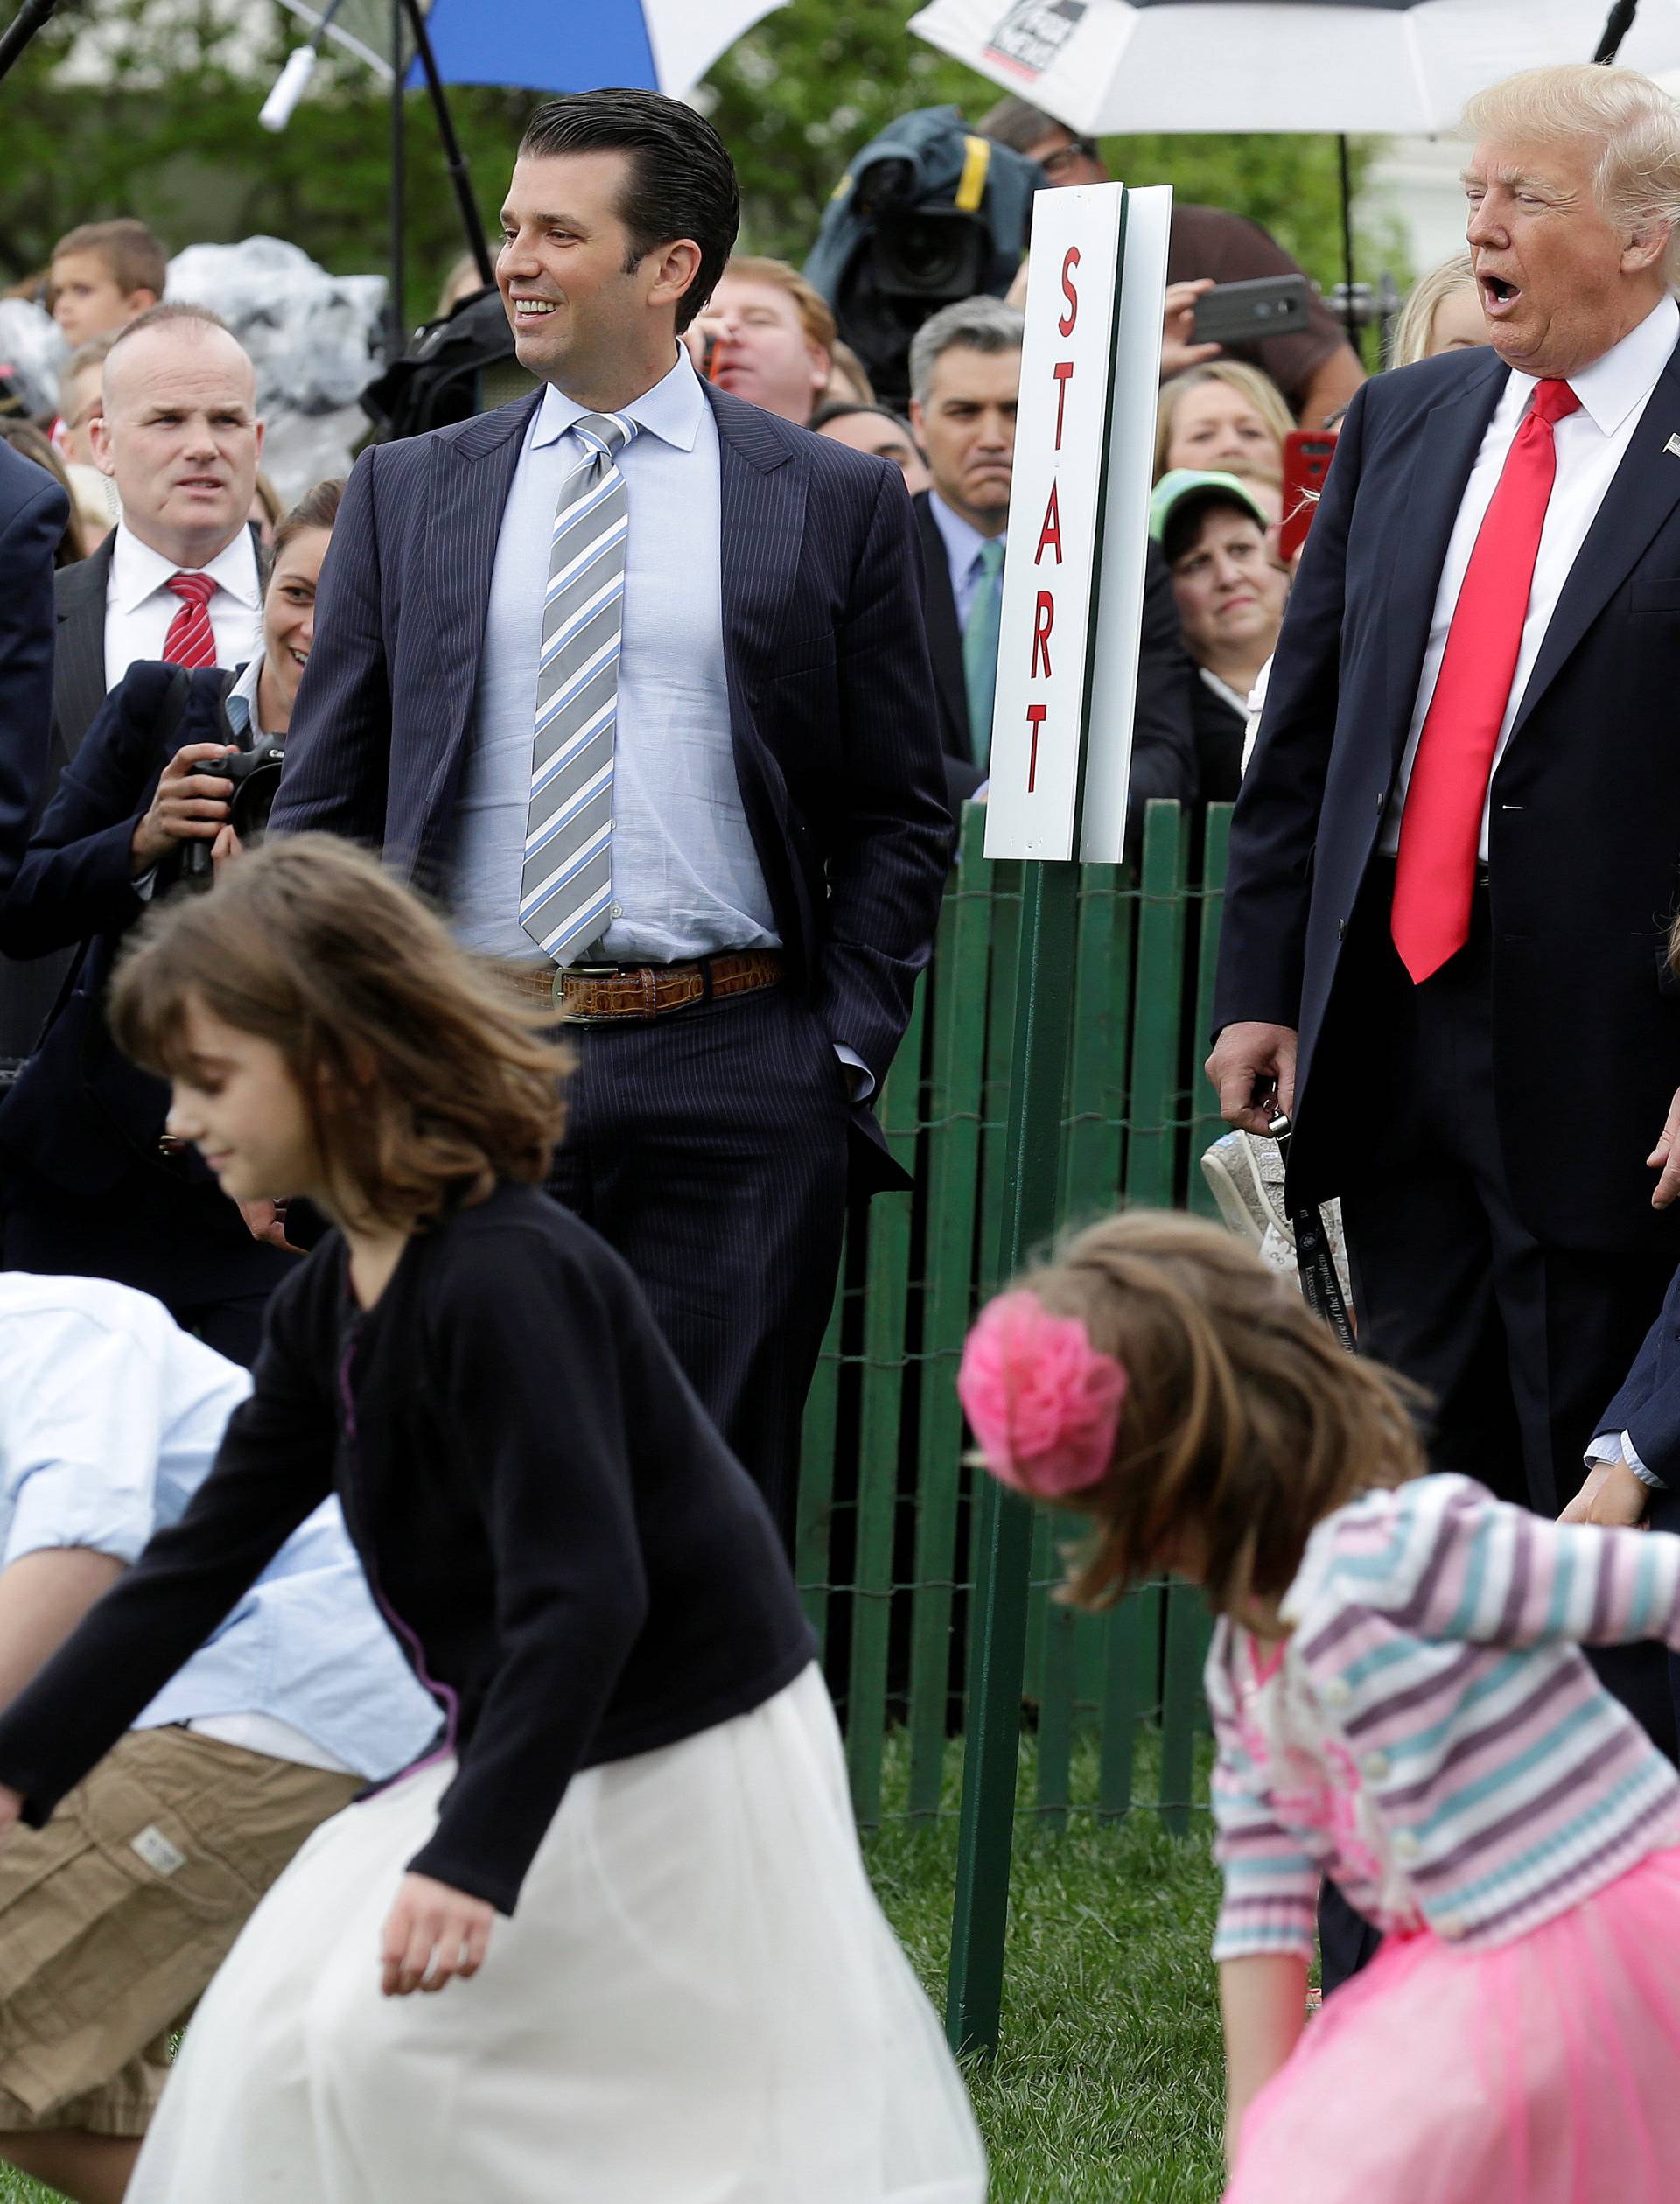 U.S. President Donald Trump and his son Donald Trump, Jr., watch children roll Easter Eggs at 139th annual White House Easter Egg Roll on the South Lawn of the White House in Washington